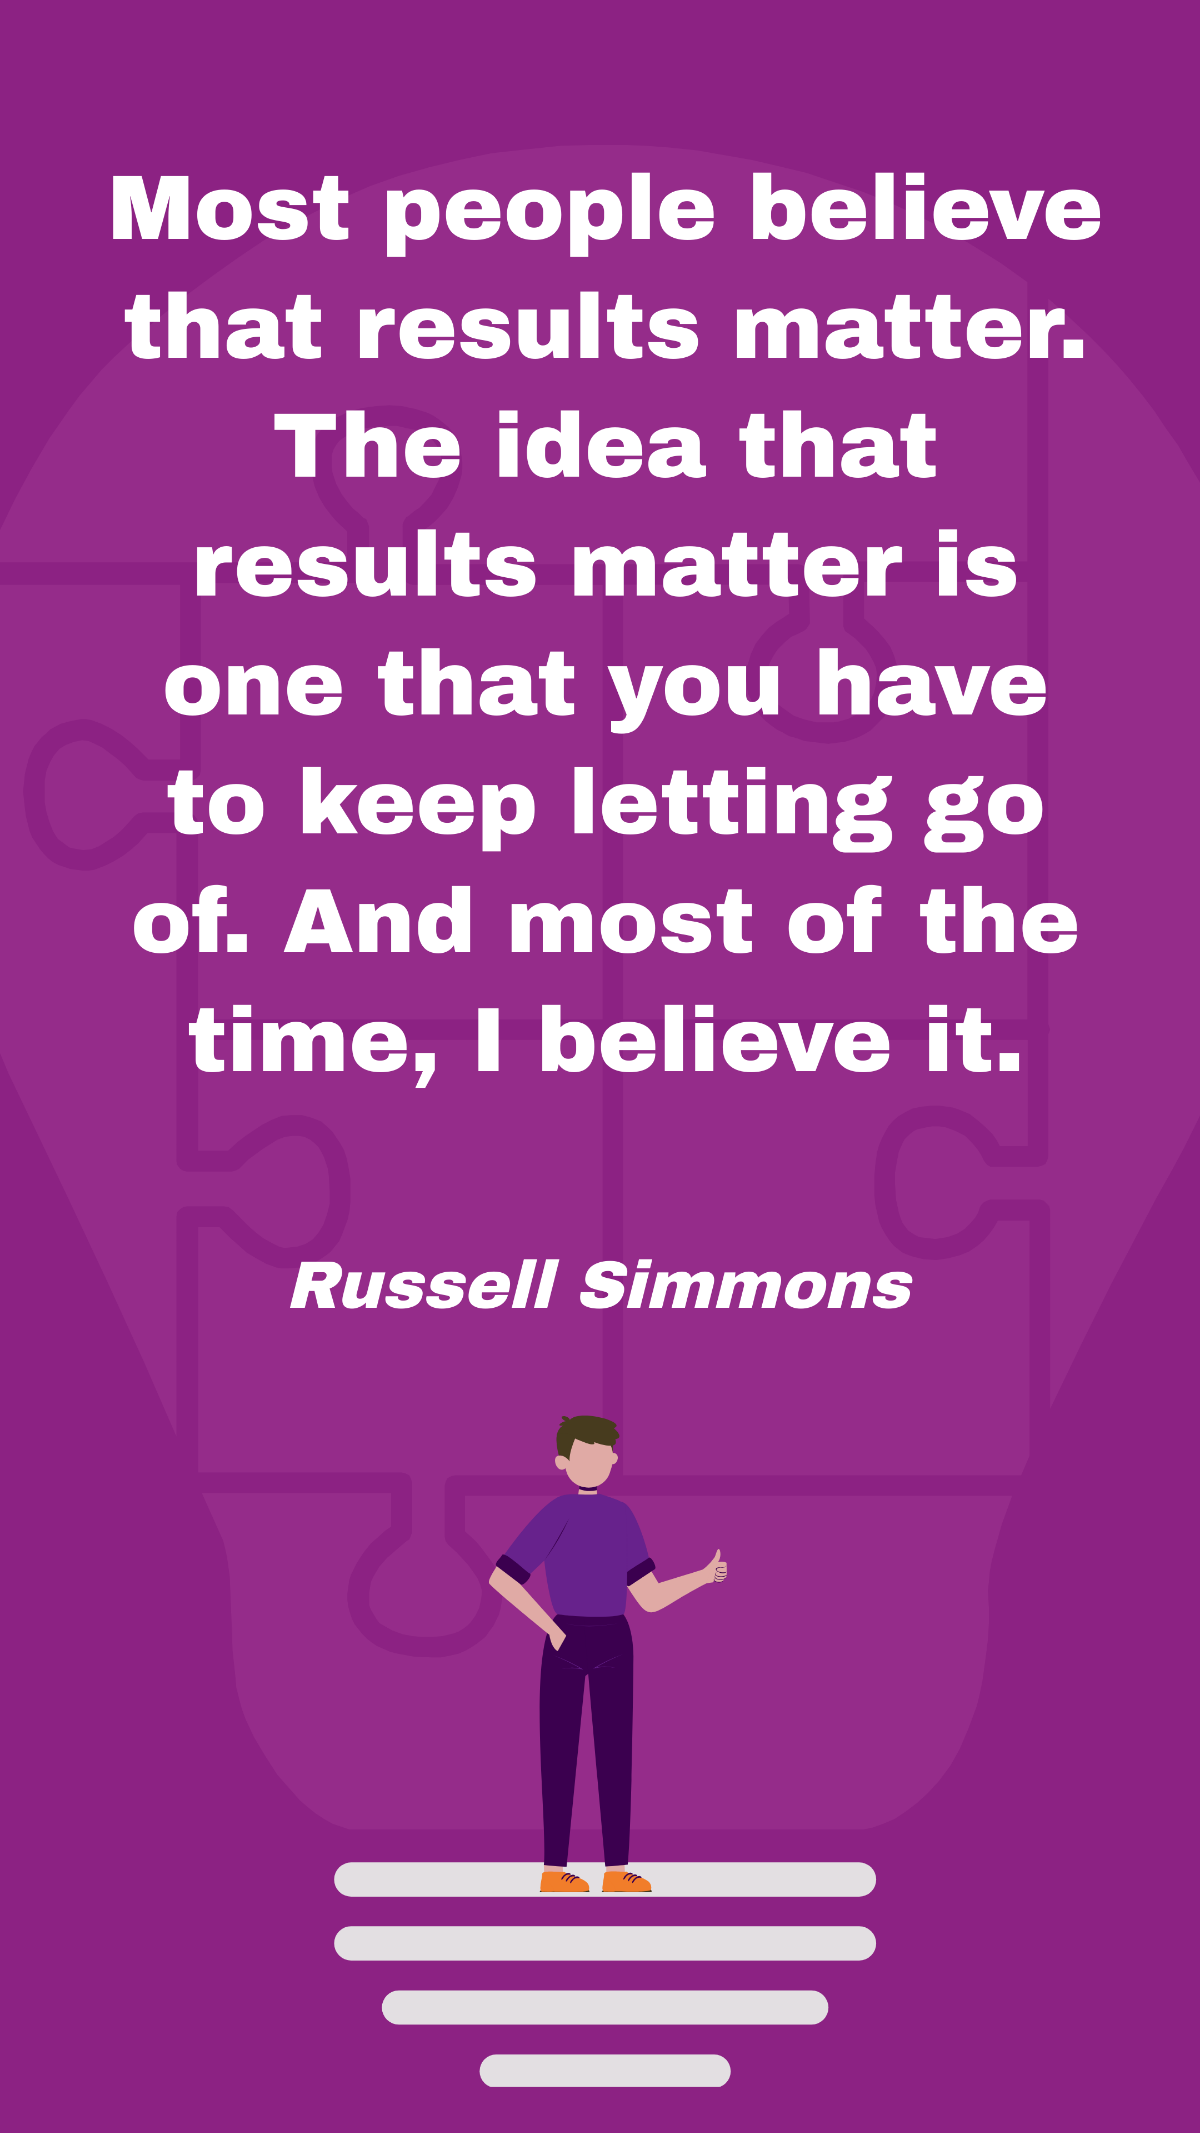 Russell Simmons - Most people believe that results matter. The idea that results matter is one that you have to keep letting go of. And most of the time, I believe it.